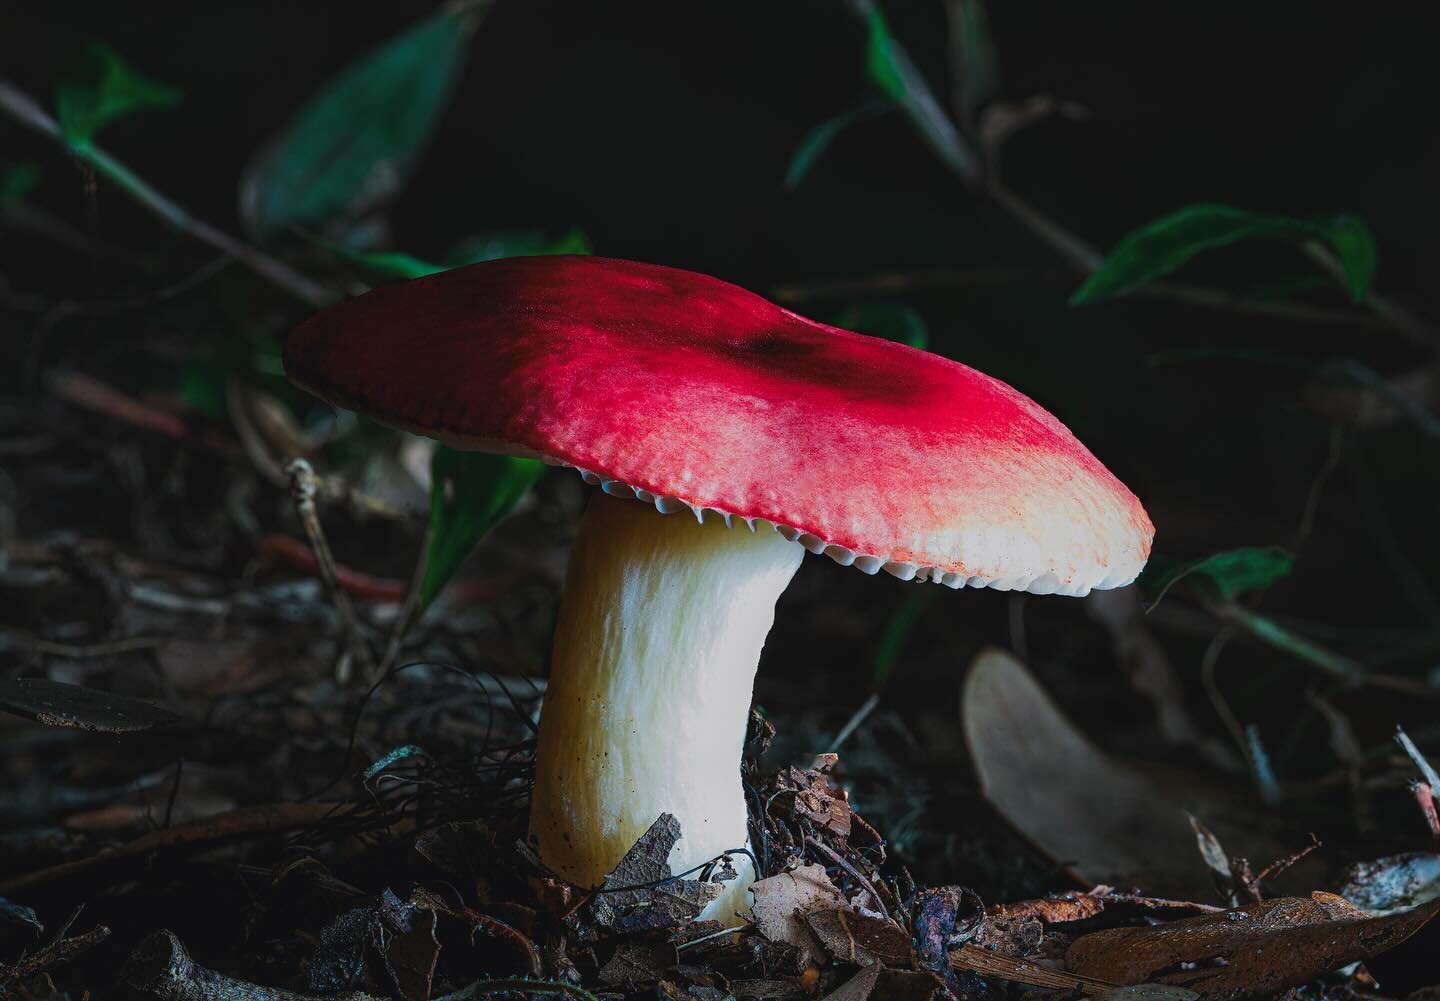 Piqued Interest. 🍄 
Just found out it&rsquo;s not &ldquo;peaked&rdquo;
Go outside.
Eat some dirt.
Nap on a log.
Take drugs.
 ⠀⠀⠀⠀⠀⠀⠀⠀⠀⠀⠀⠀ 
 ⠀⠀⠀⠀⠀⠀⠀⠀⠀⠀⠀⠀ 
#mushroomkingdom #mushroom #nature #wildpath #floridaphotography #wildliferefuges #wildlife 
#m